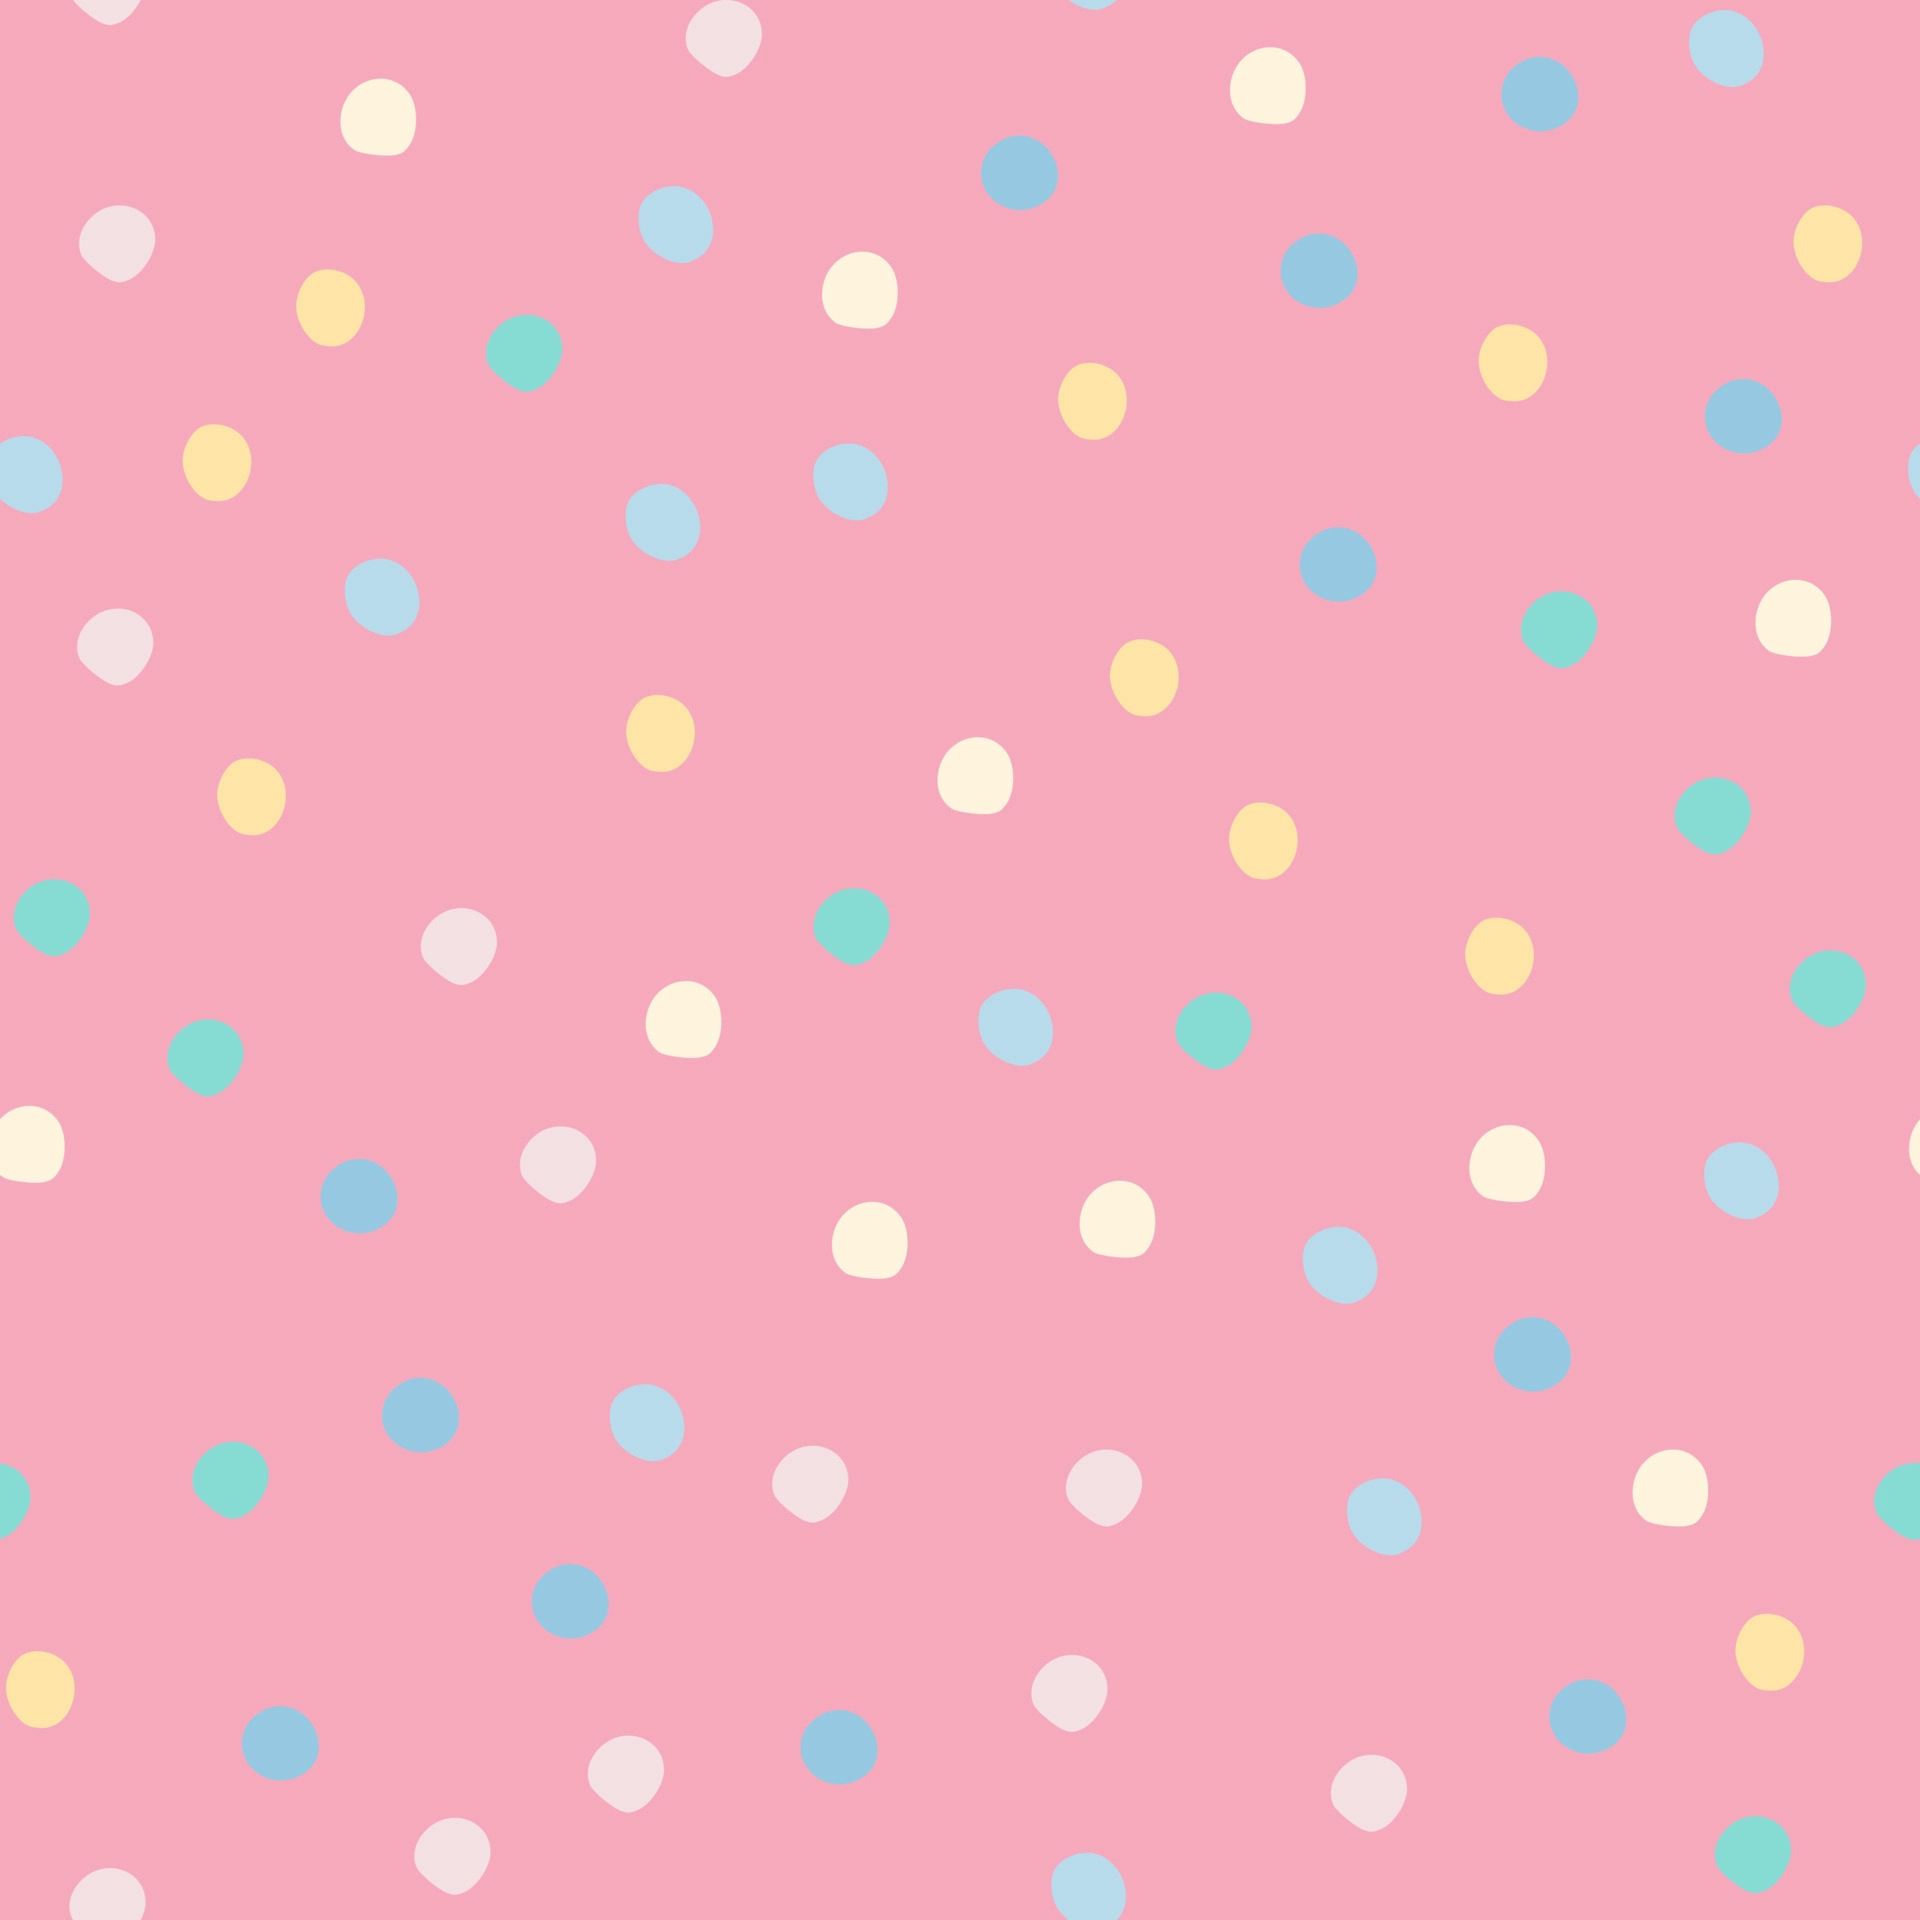 1920x1920 Abstract colored polka dots seamless pattern on pink background. Cute circle shapes wallpaper. 5566475 Vector Art